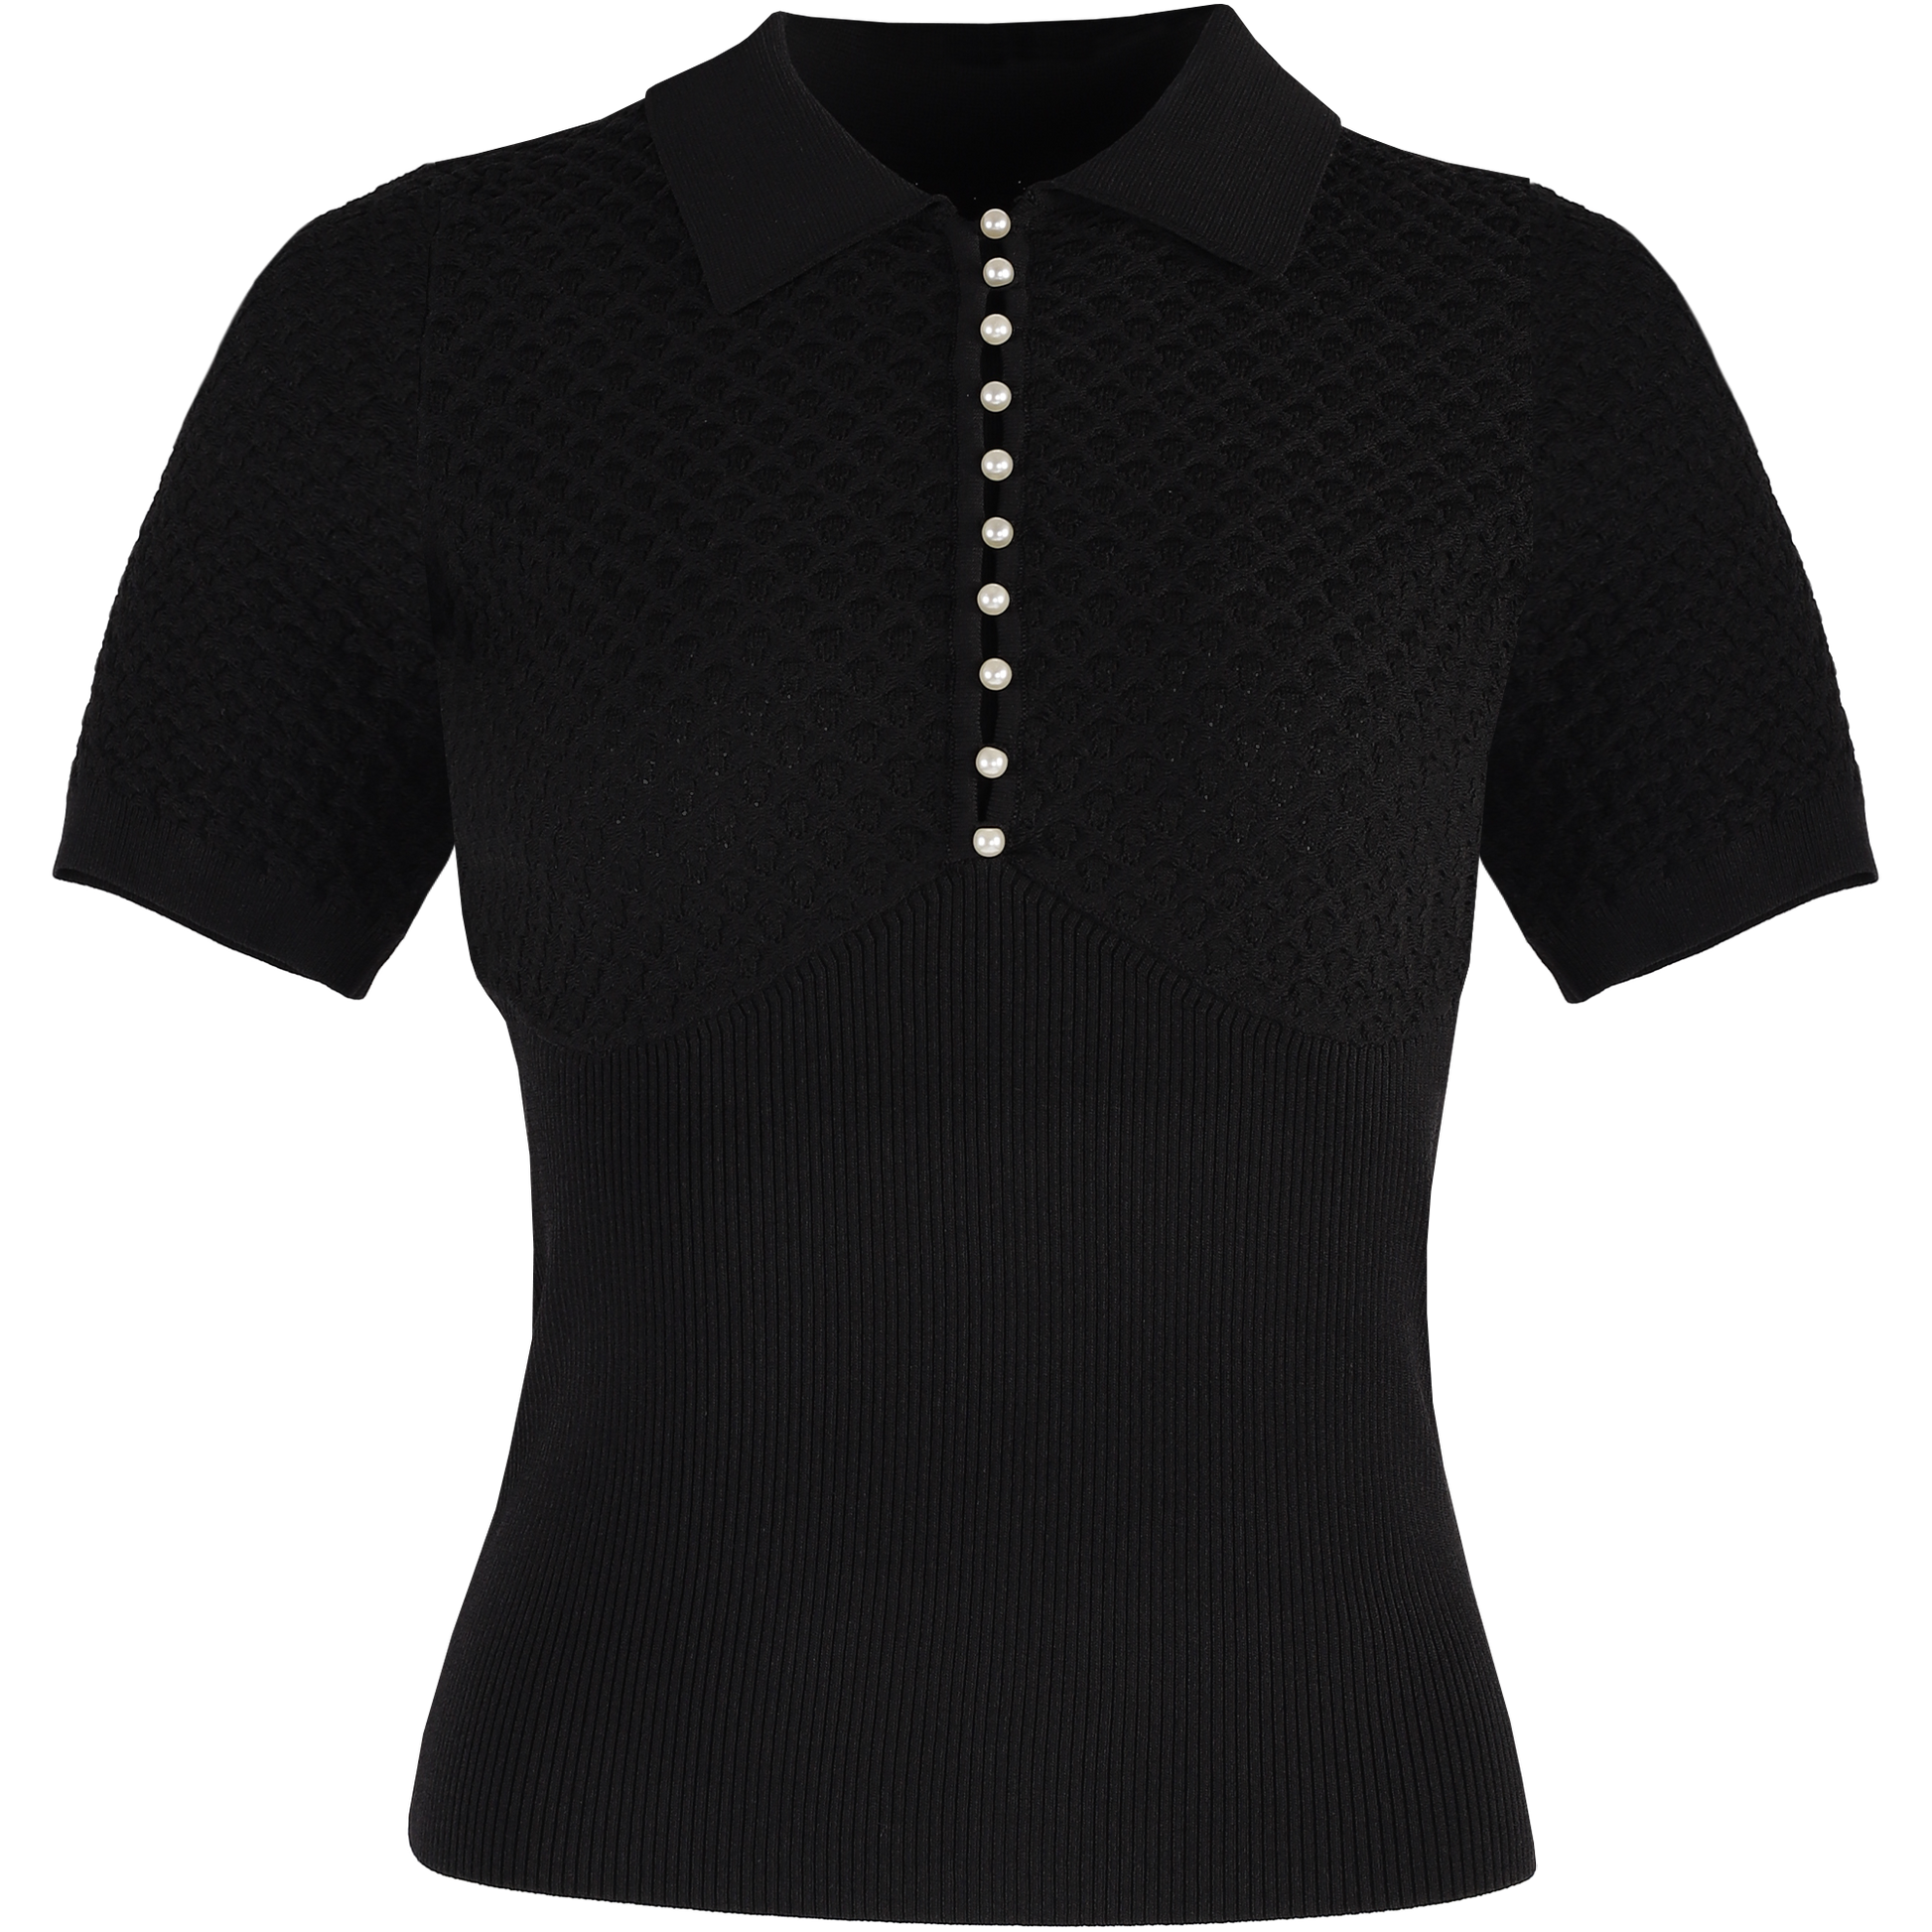 Black Knitted Ladies Blouse — Stylish Uniforms for Your Front Line Staff